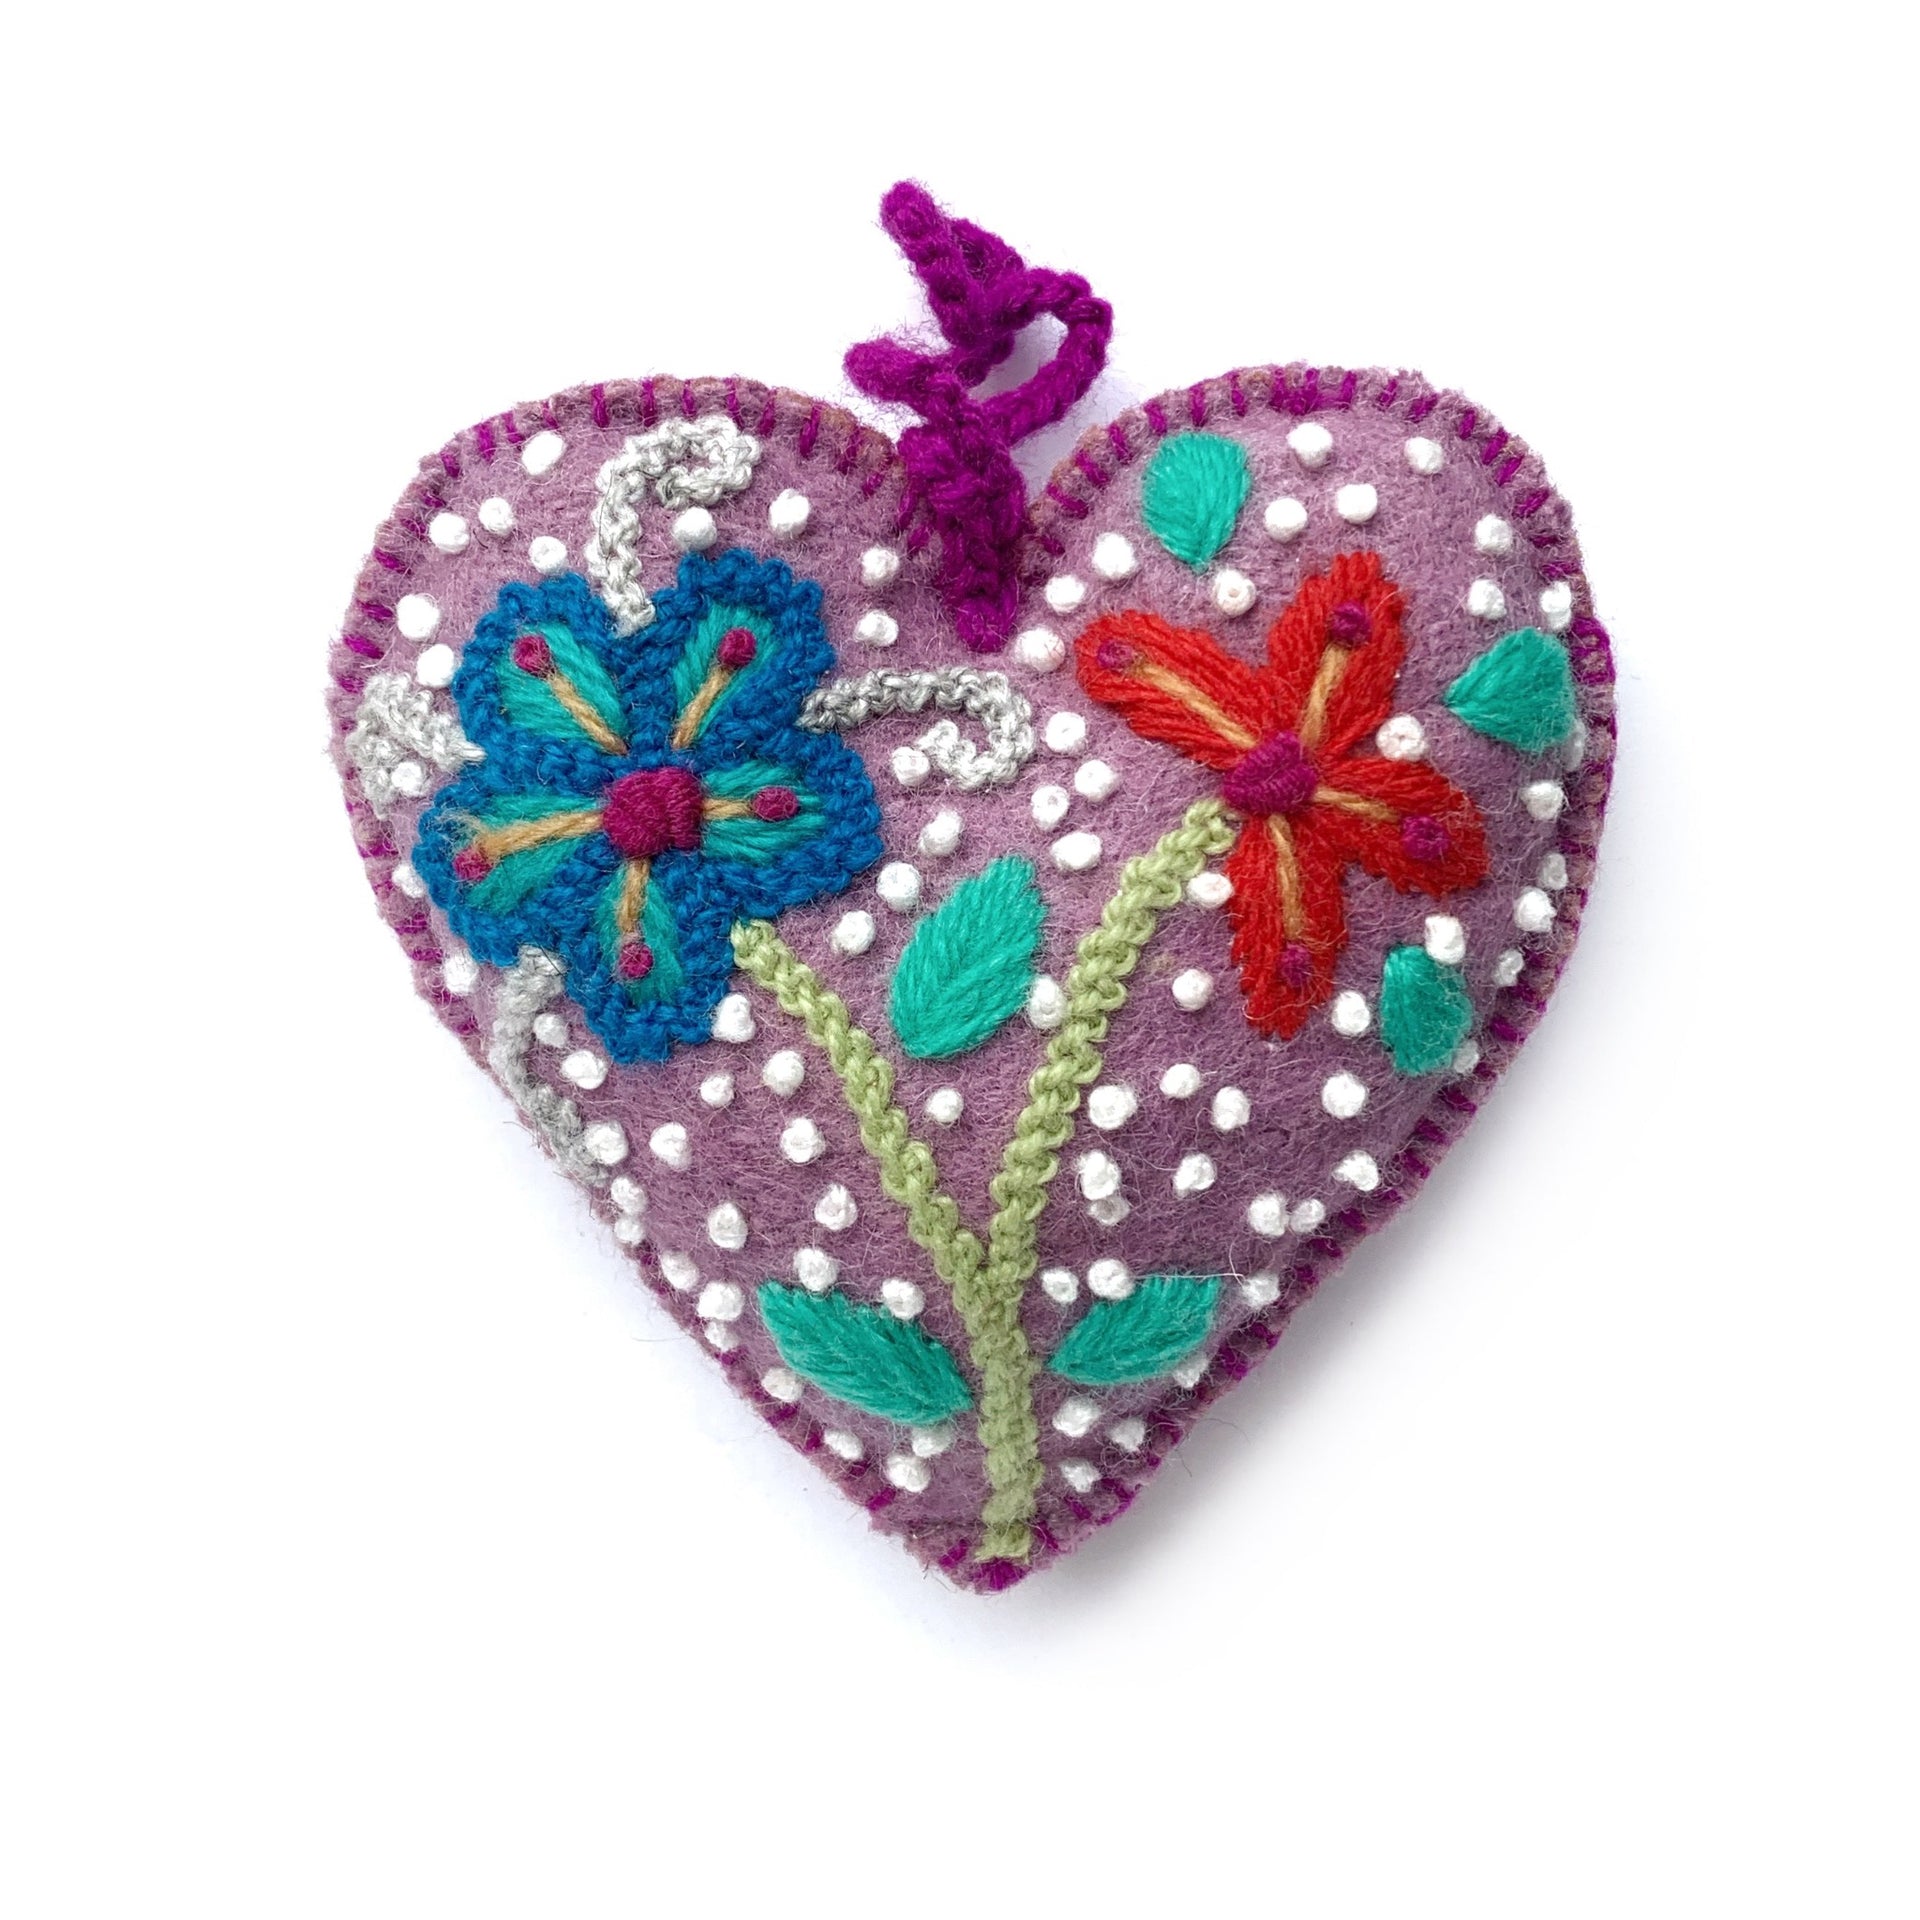 SLO Heart Ornament from HumanKind Fair Trade - HumanKind Fair Trade